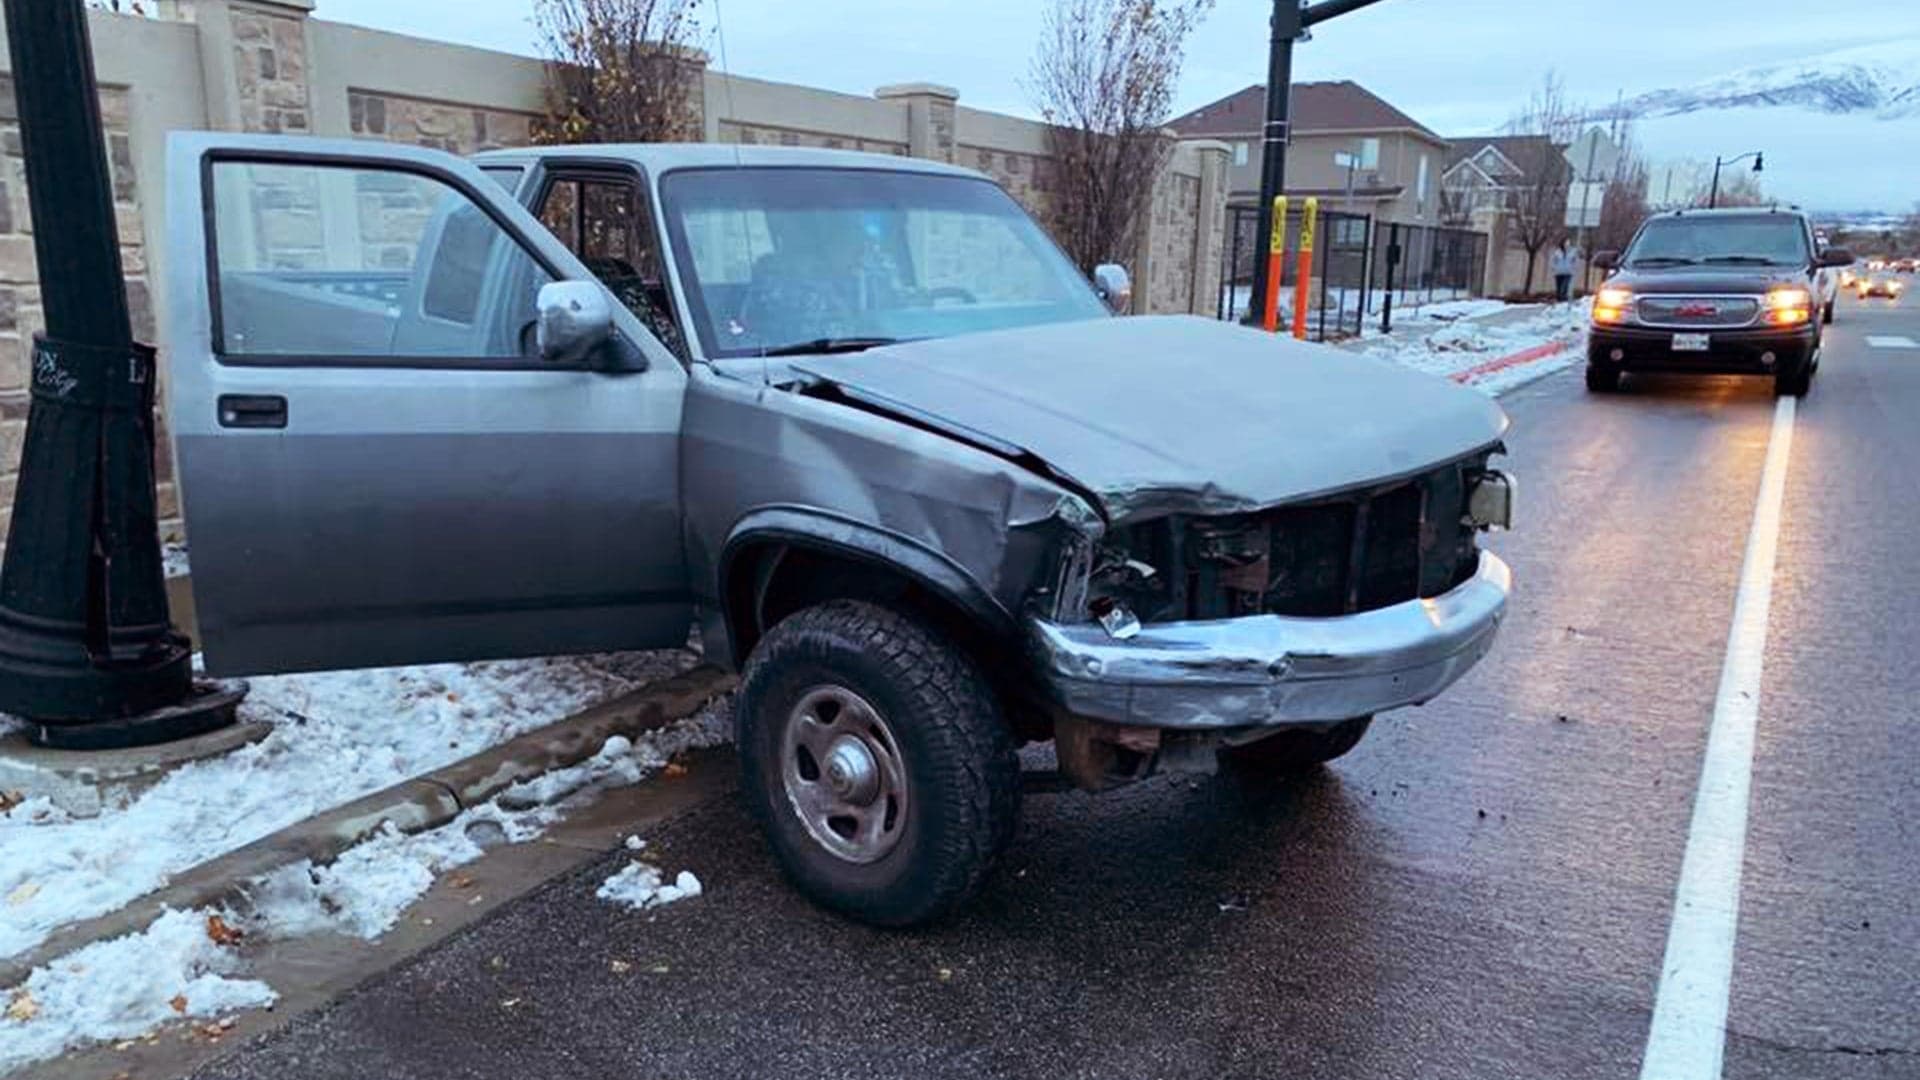 Blindfolded Teen Driver Crashes Into Oncoming Traffic Attempting Bird Box Challenge